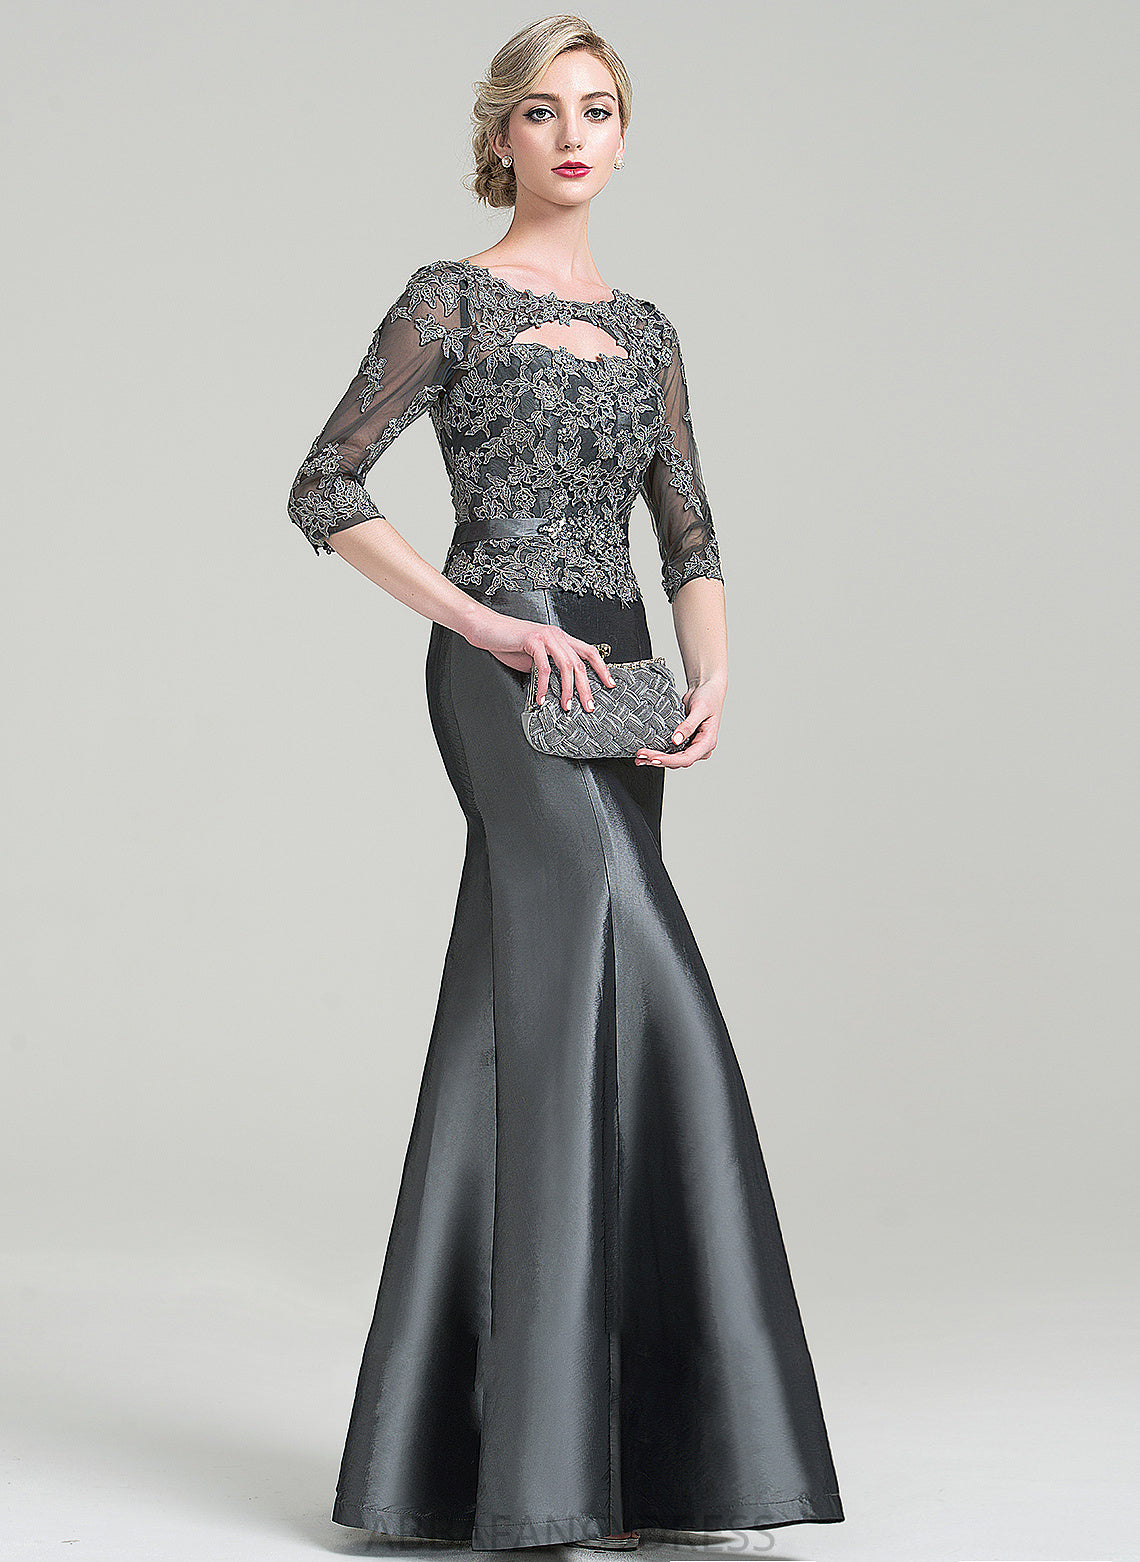 of Trumpet/Mermaid Lace Sequins Mother of the Bride Dresses Bride Floor-Length With Mother Appliques Scoop Neck Taffeta Beading the Dress Alexandra